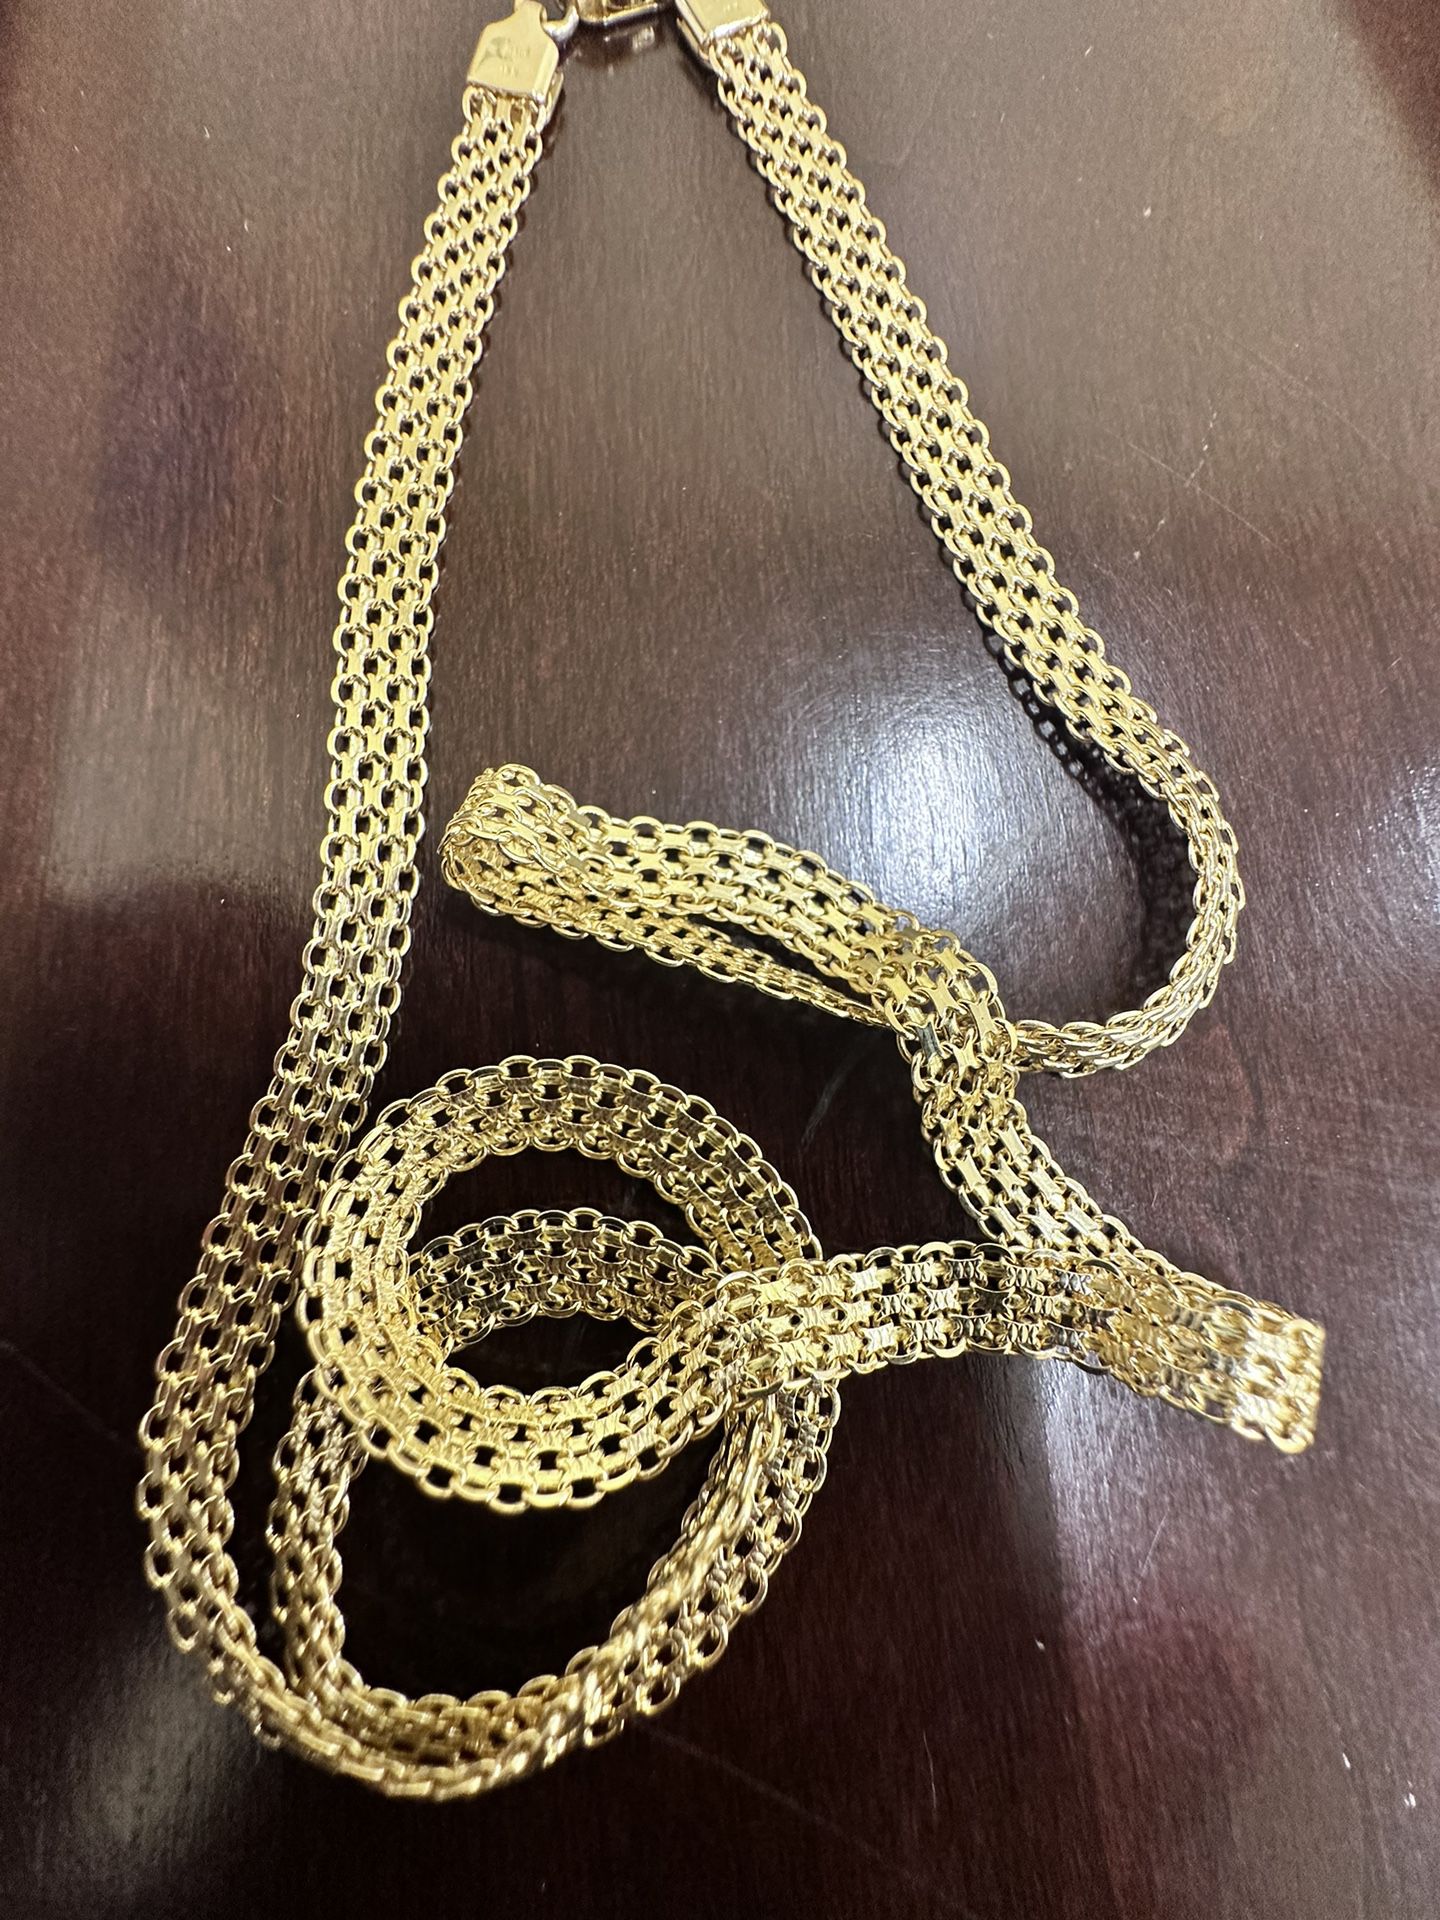 Authentic 18k Italian pure yellow gold necklace 23.3 Gr 25” chinesca style.  I will meet you at any local jewelry for gold authenticity.  Only serious